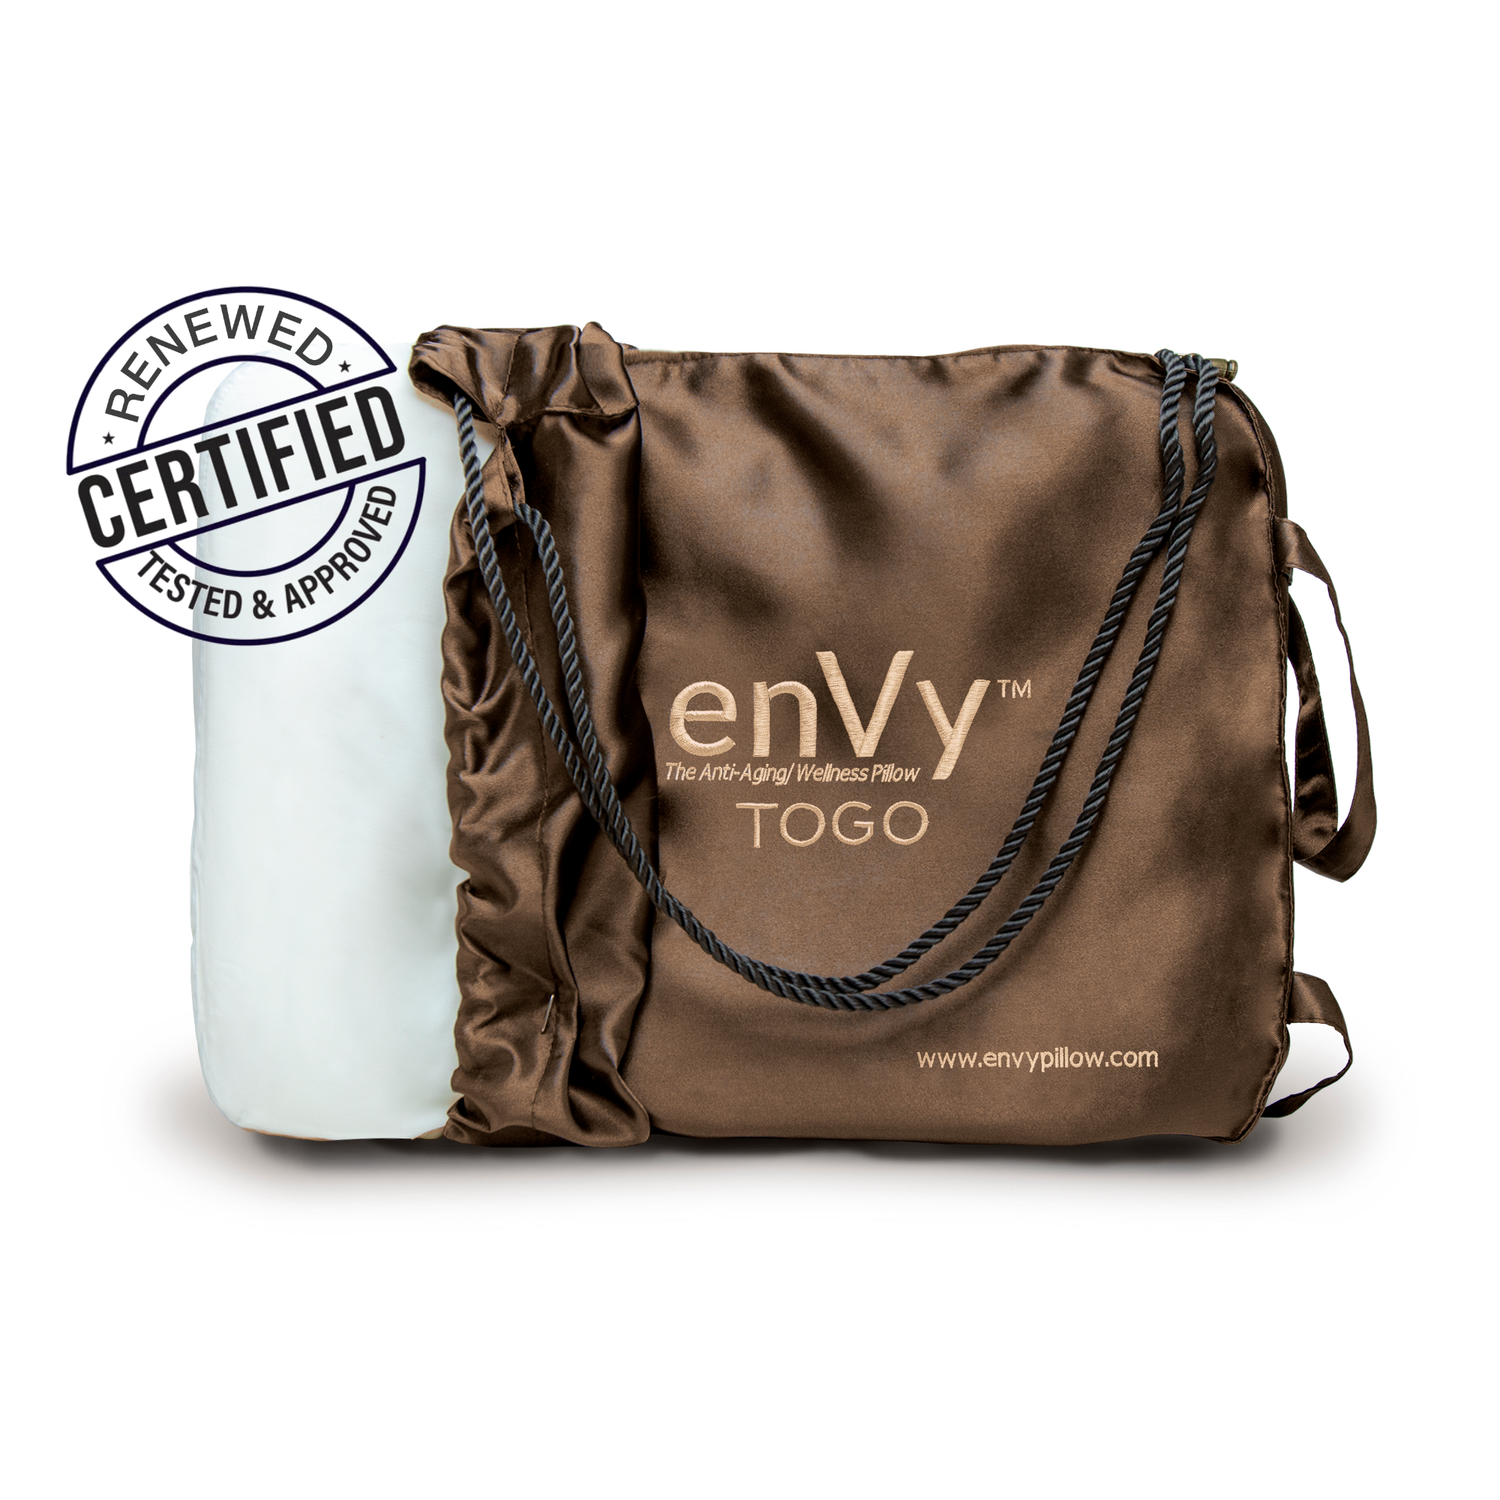 The ReNEW™ enVy®  TO GO with SILK pillowcase